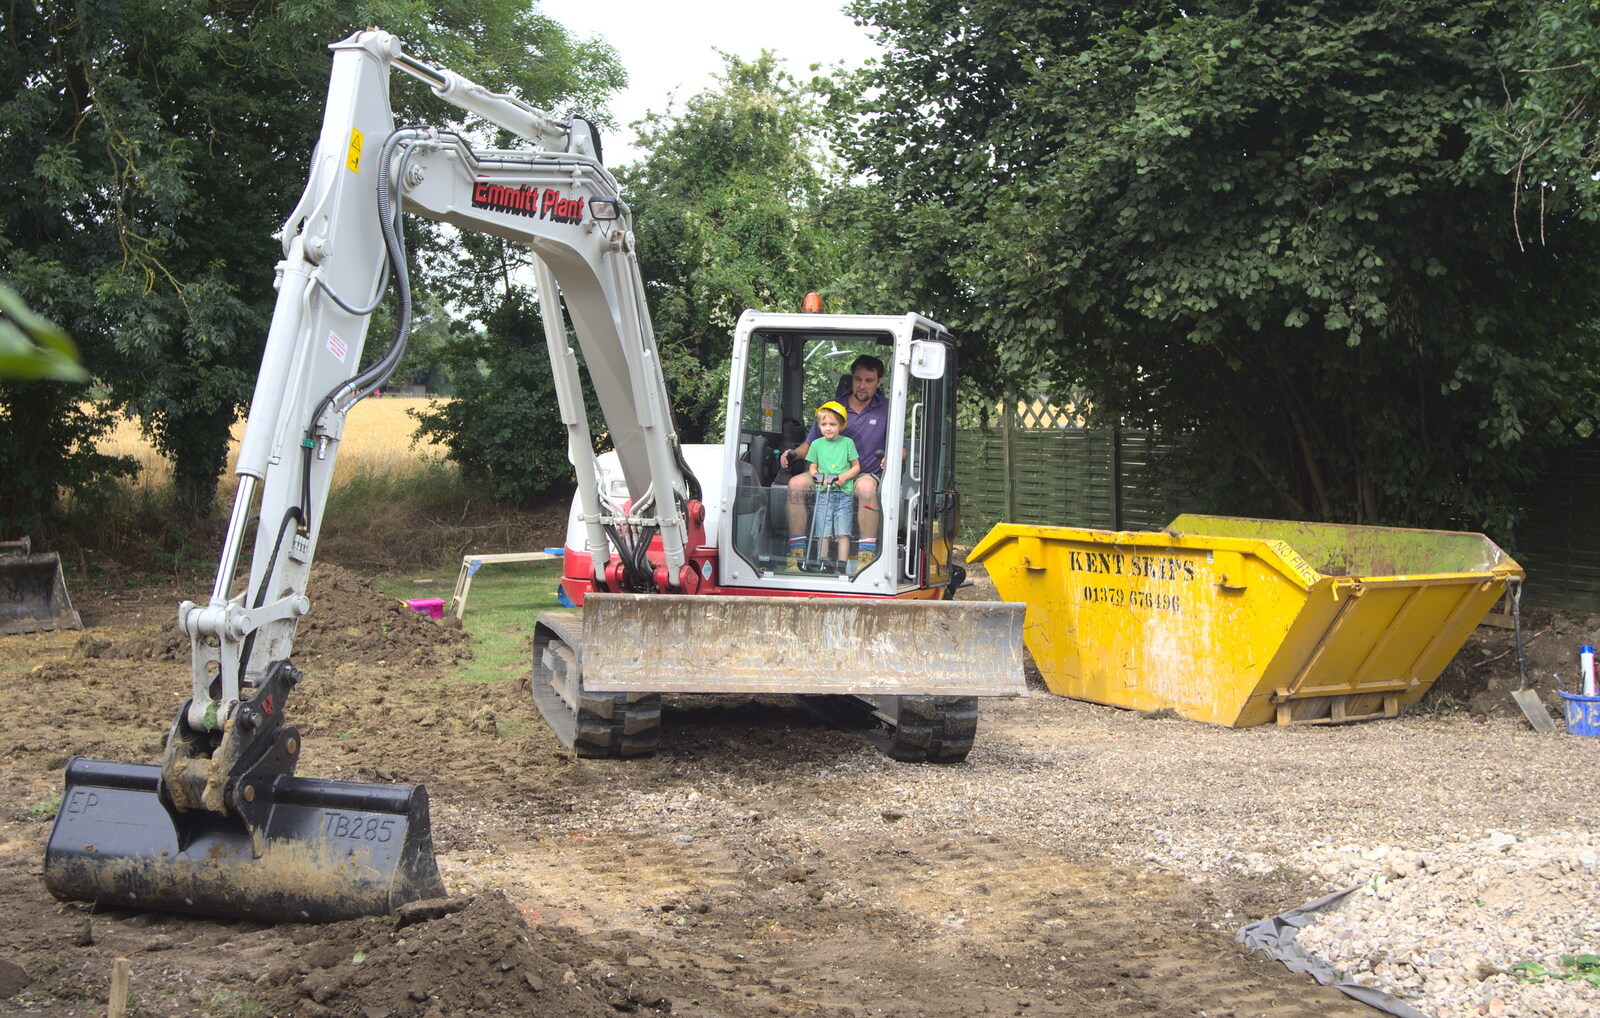 Fred in a digger from Grand Designs: Building Commences, Brome, Suffolk - 8th August 2013